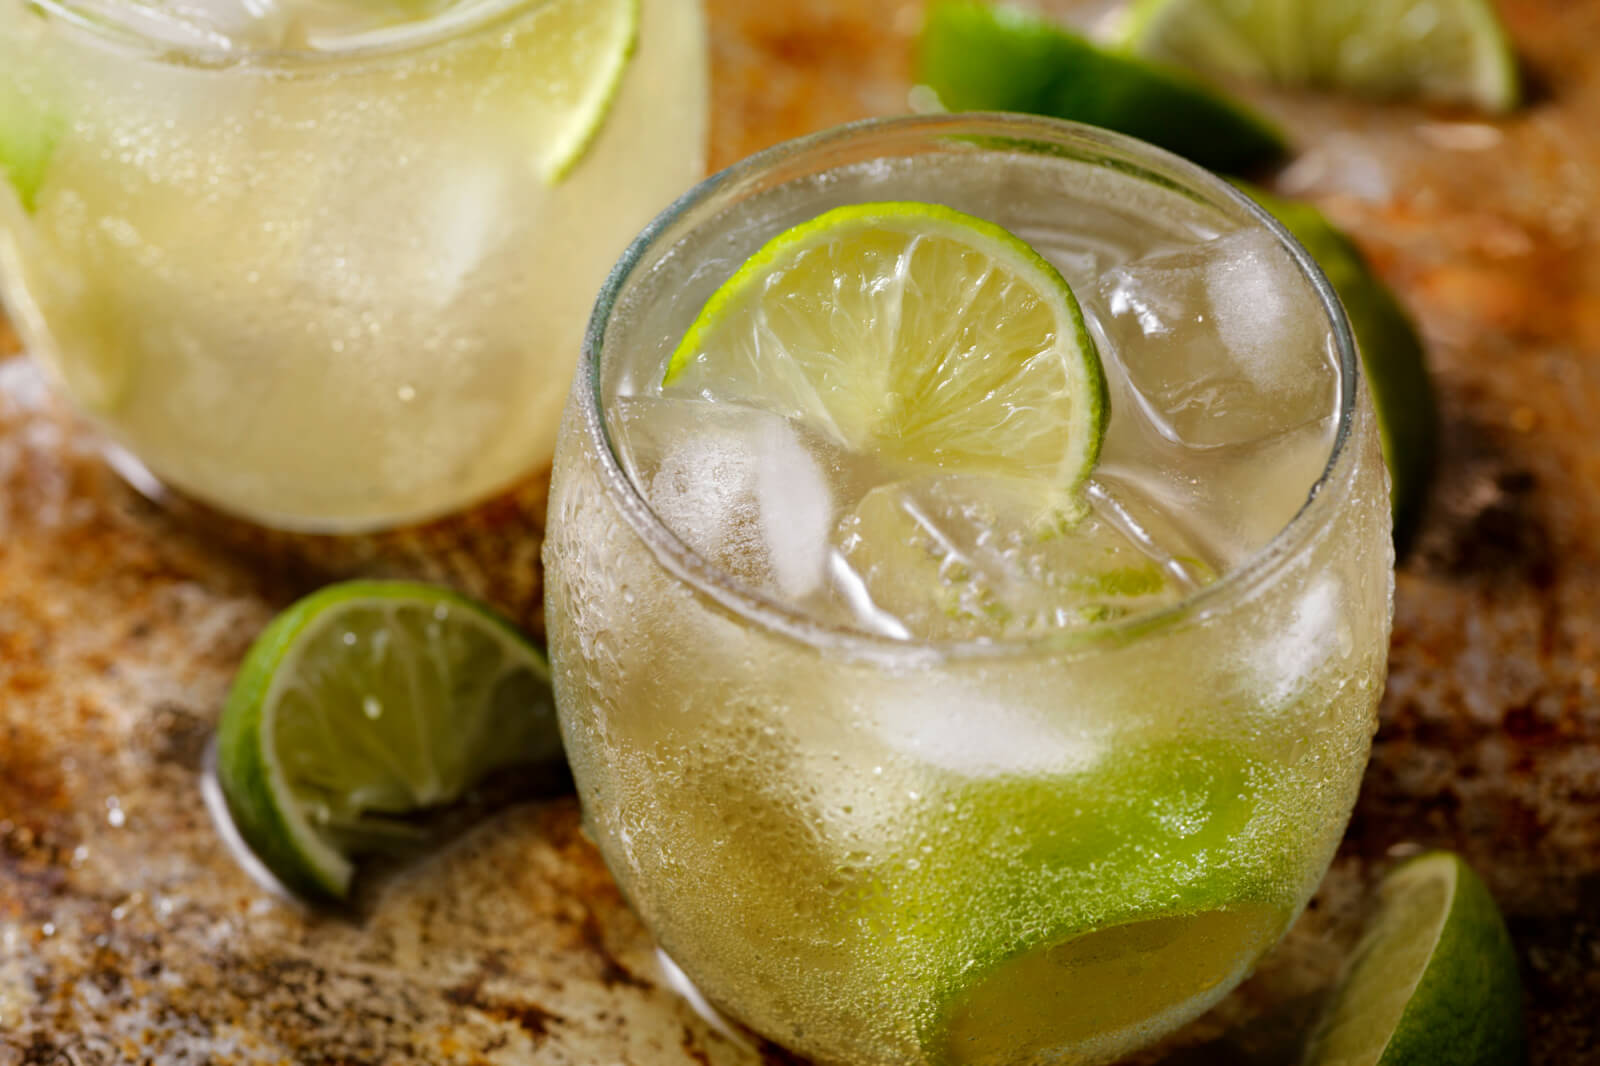 RECIPE: Ginger-Lime Cocktail